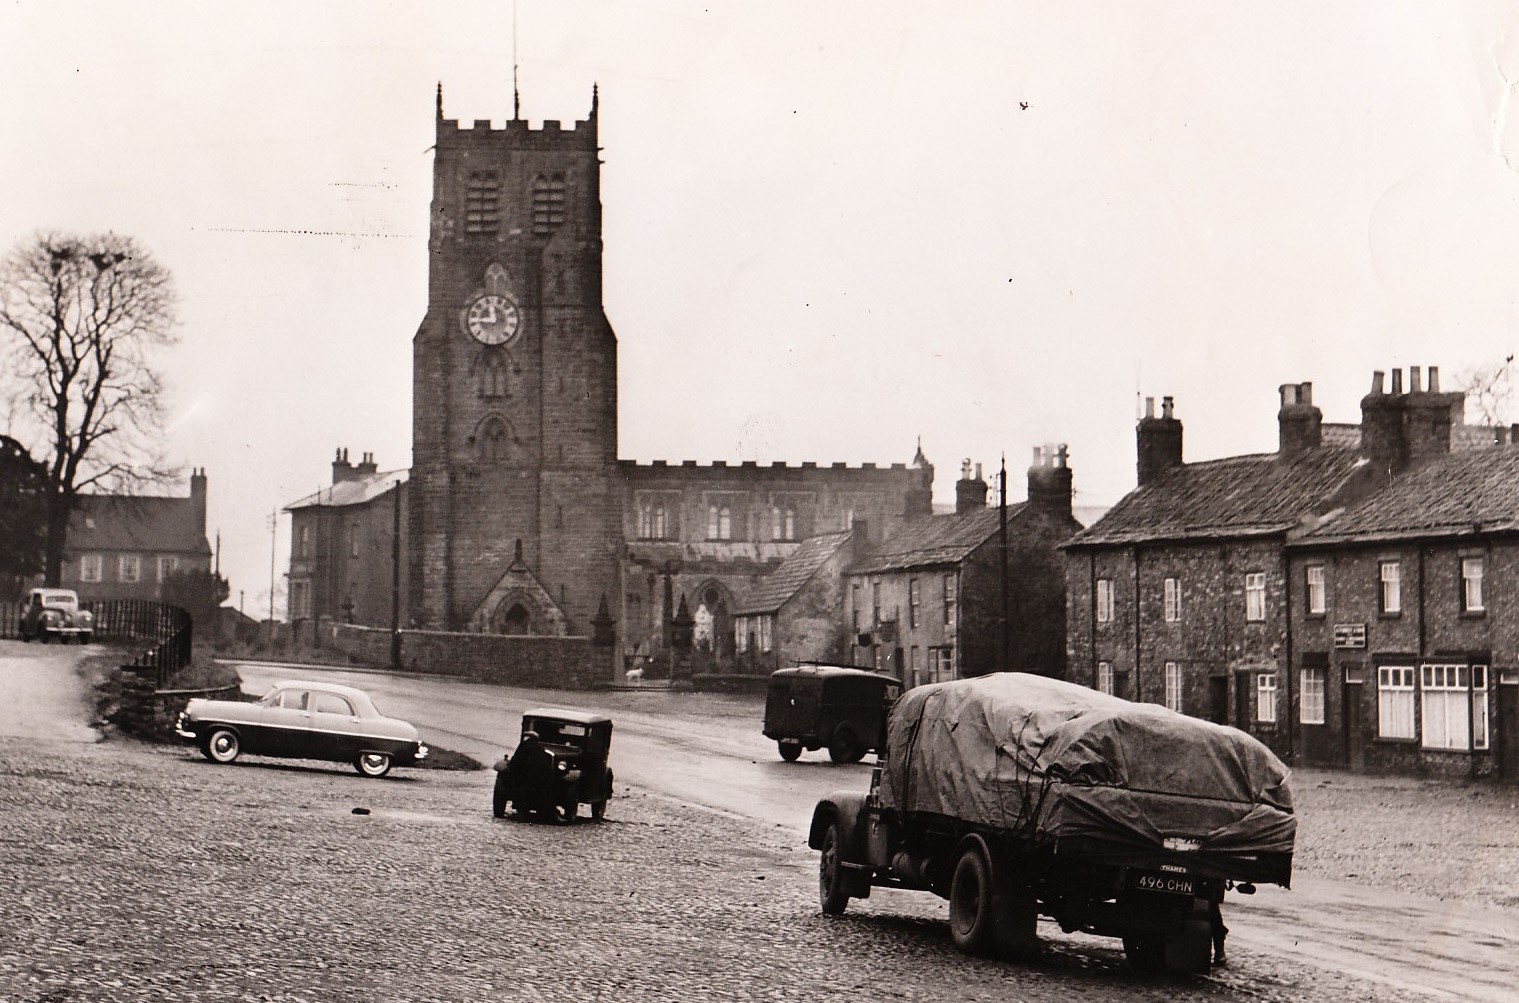 St Gregorys Church, Bedale, on January 18, 1952, with the war memorial to the right of the main entrance